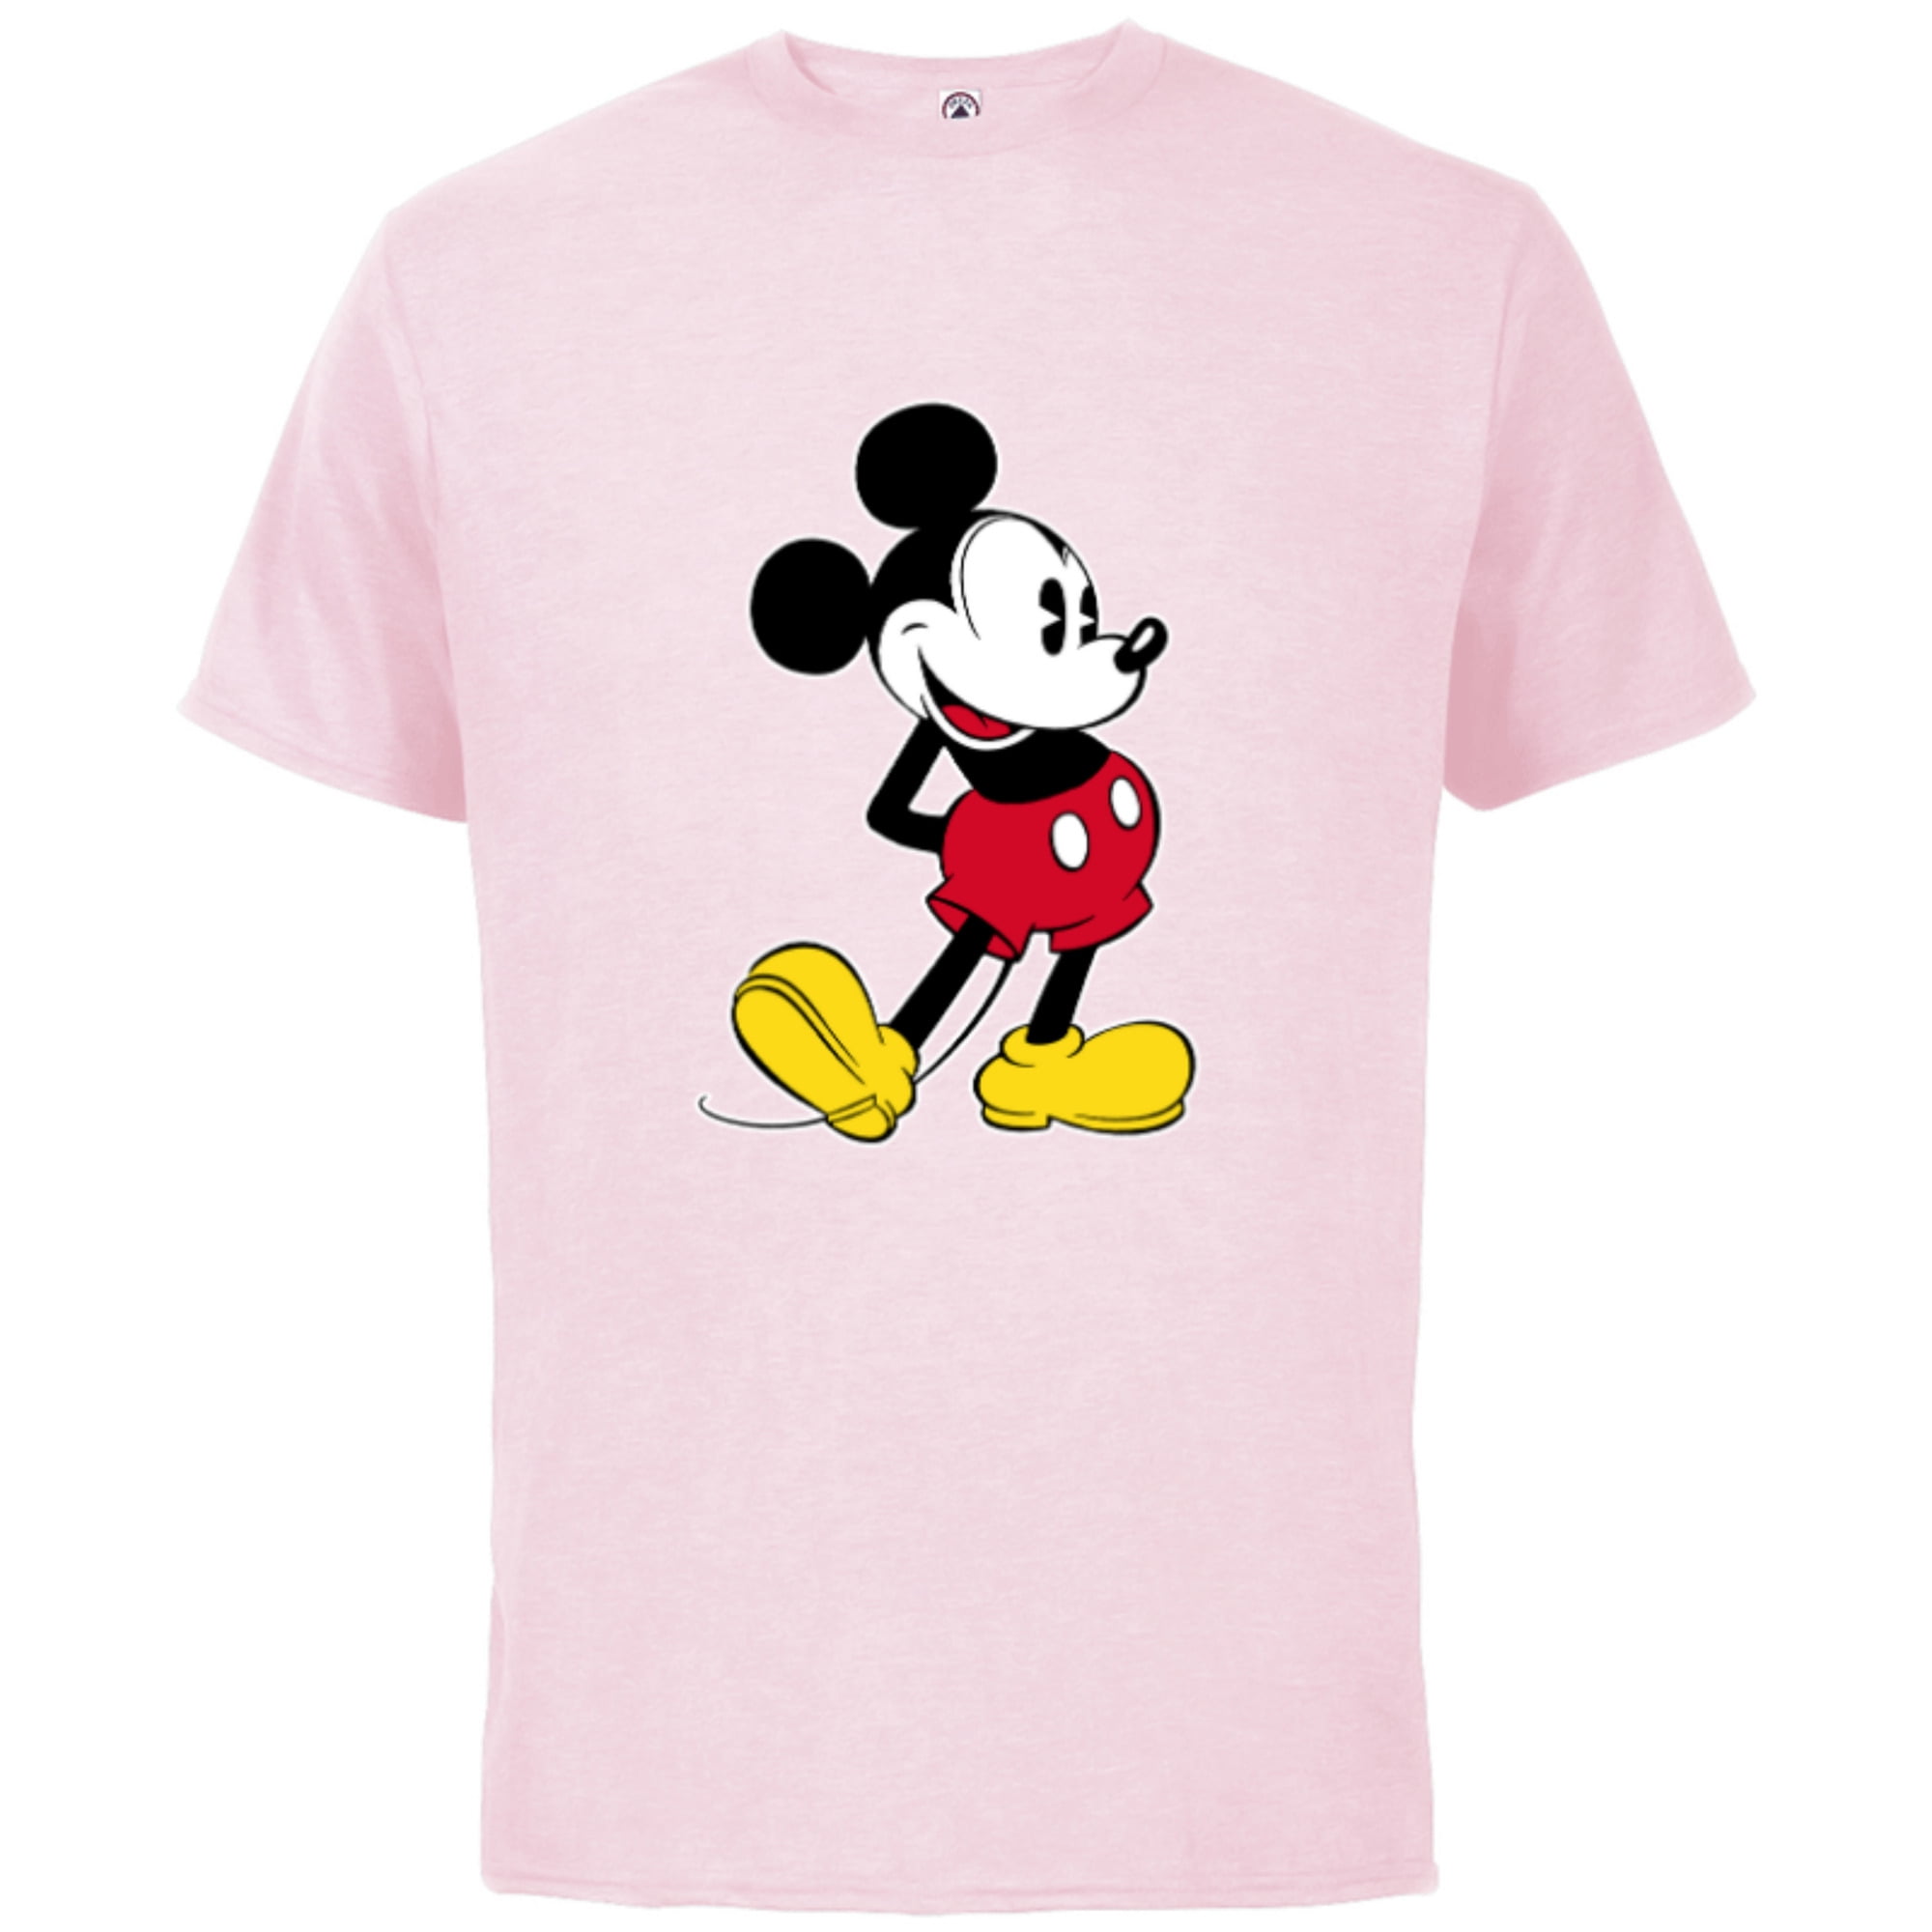 Disney Mickey Mouse Classic for Adults- Pink Sleeve Pose T-Shirt Short - Customized-Soft Cotton